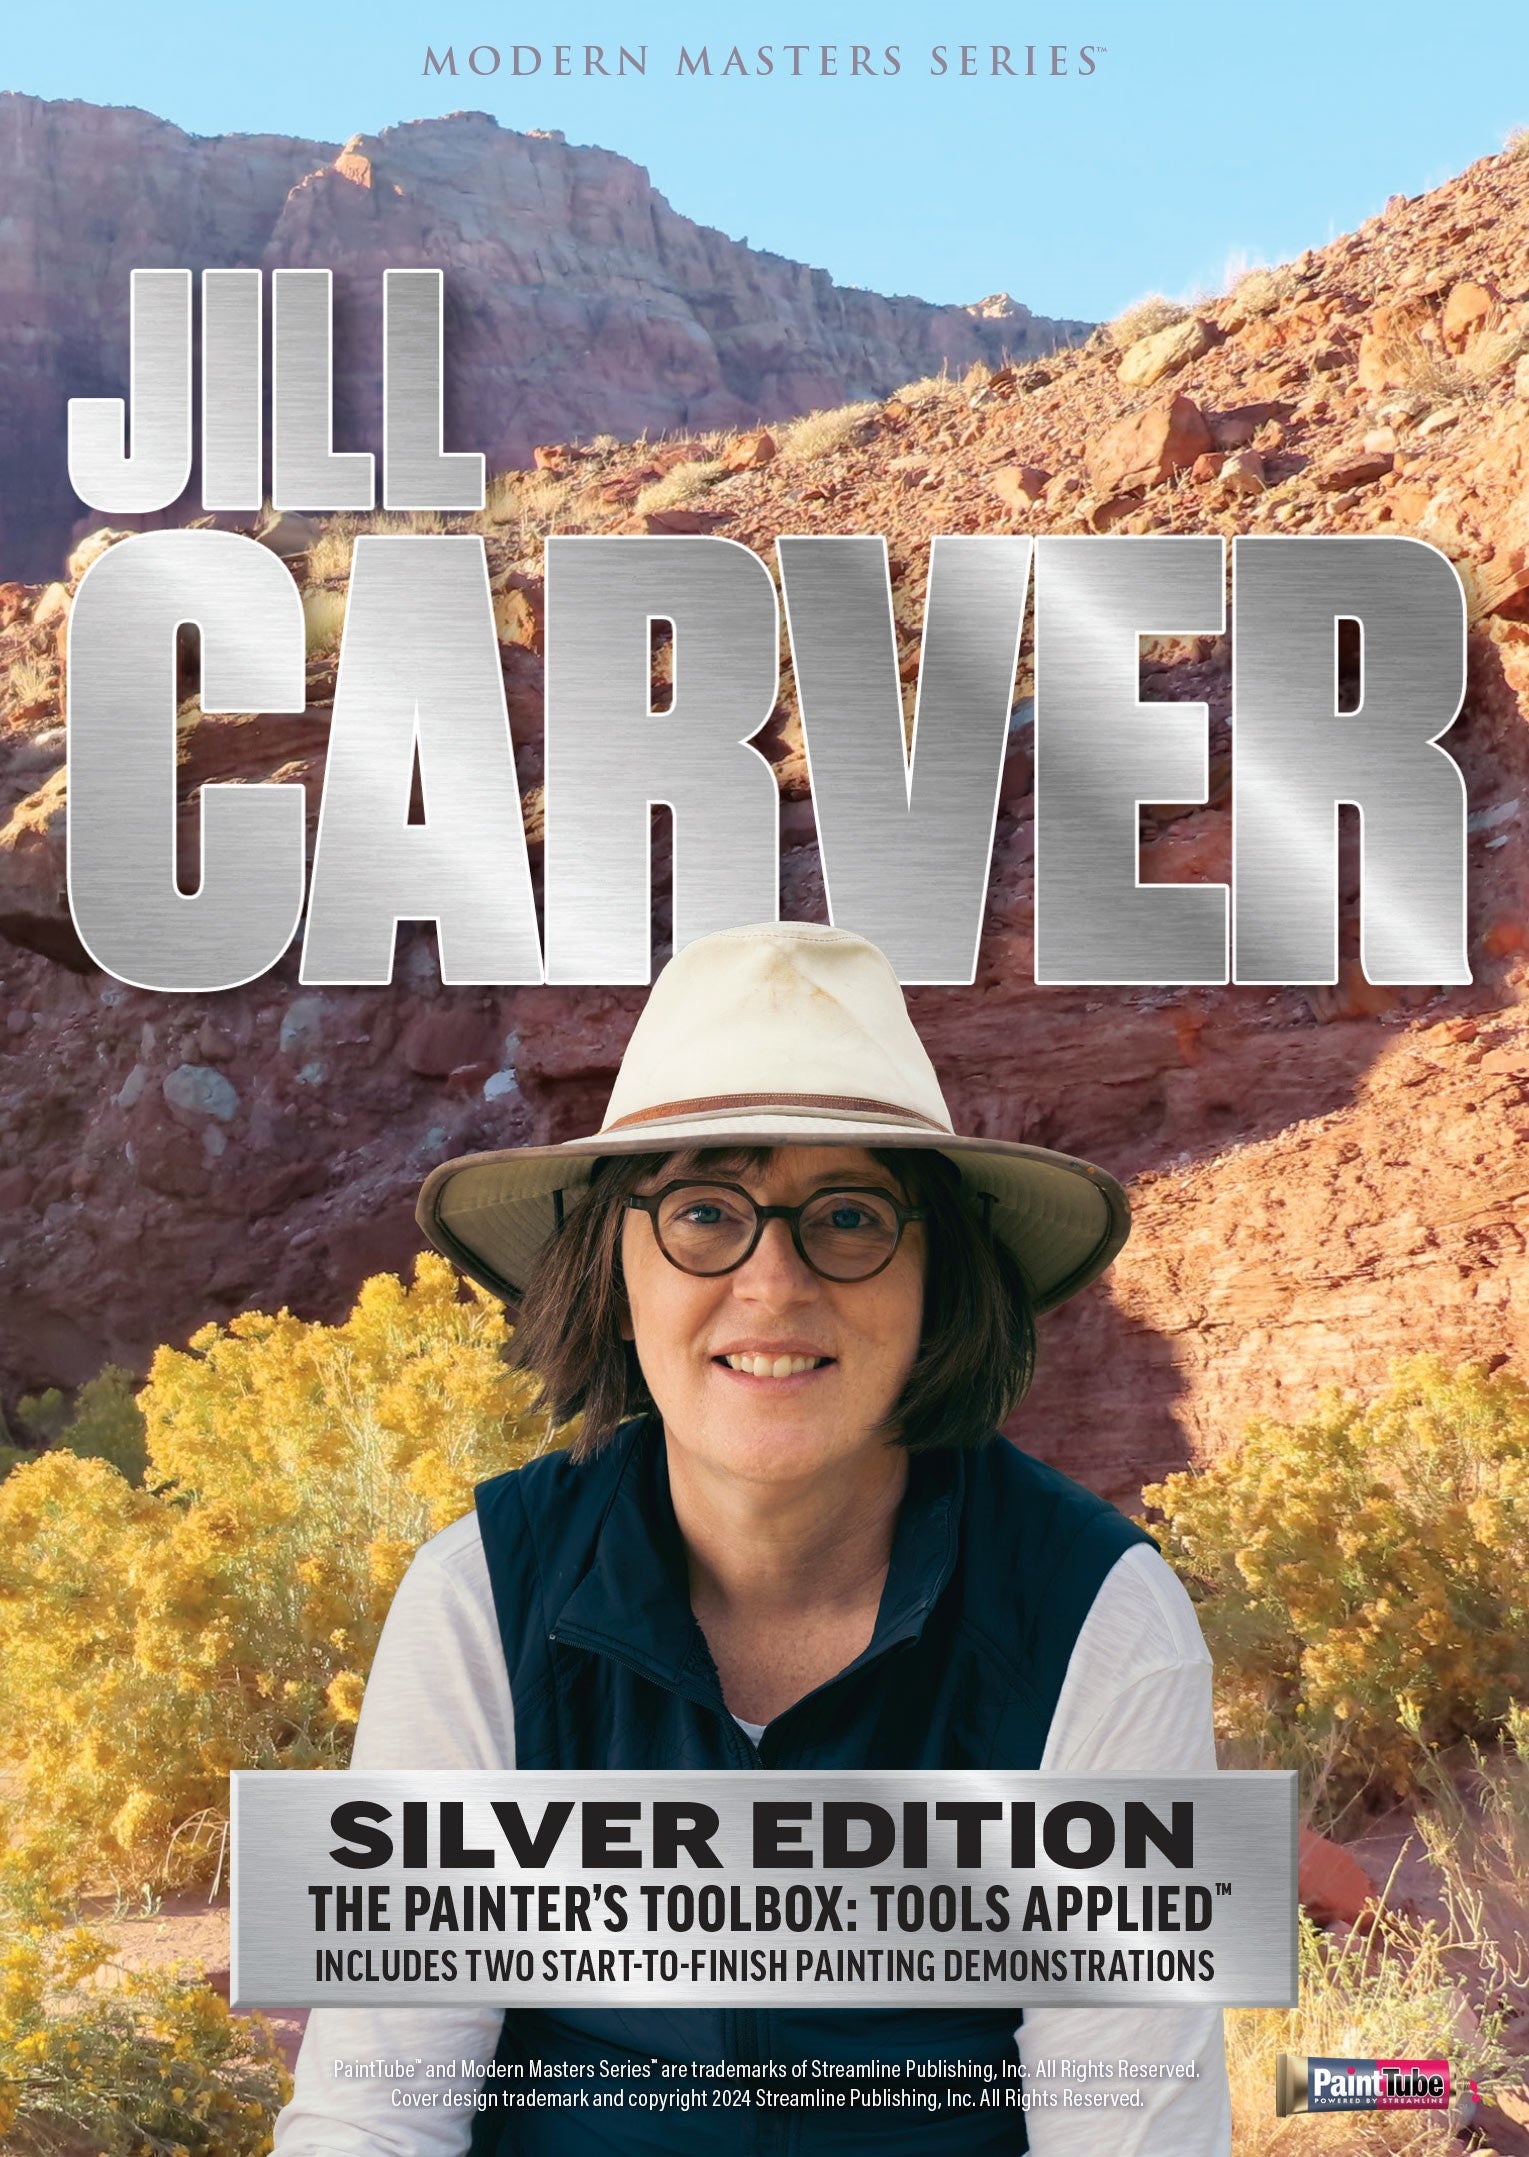 JILL CARVER: THE PAINTER'S TOOLBOX — SILVER EDITION — TOOLS APPLIED